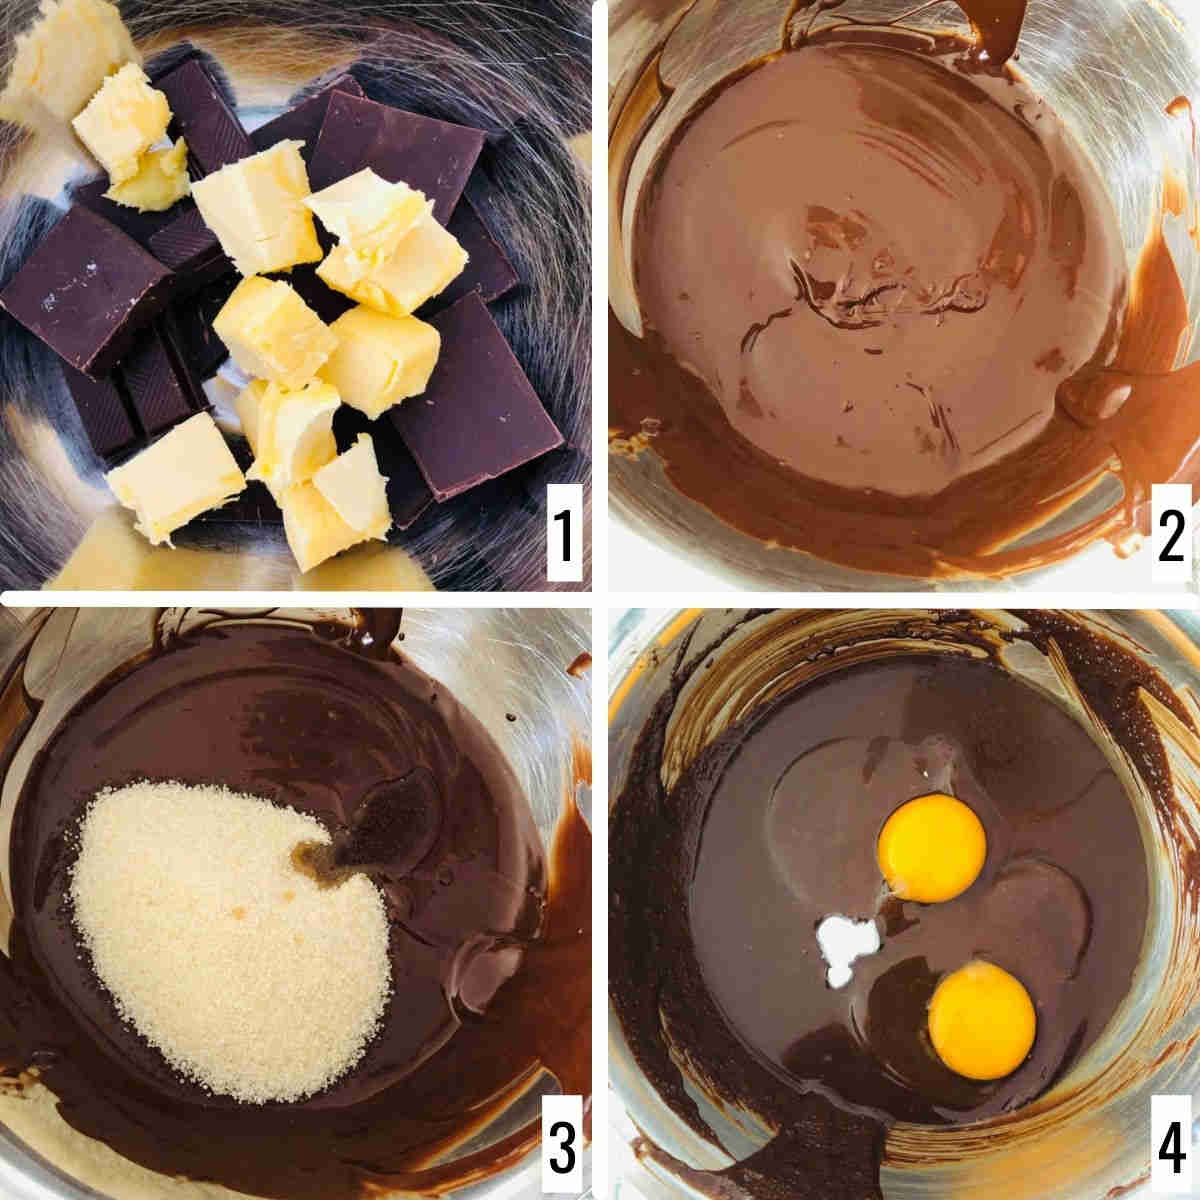 Melt chocolate and mix the wet ingredients.